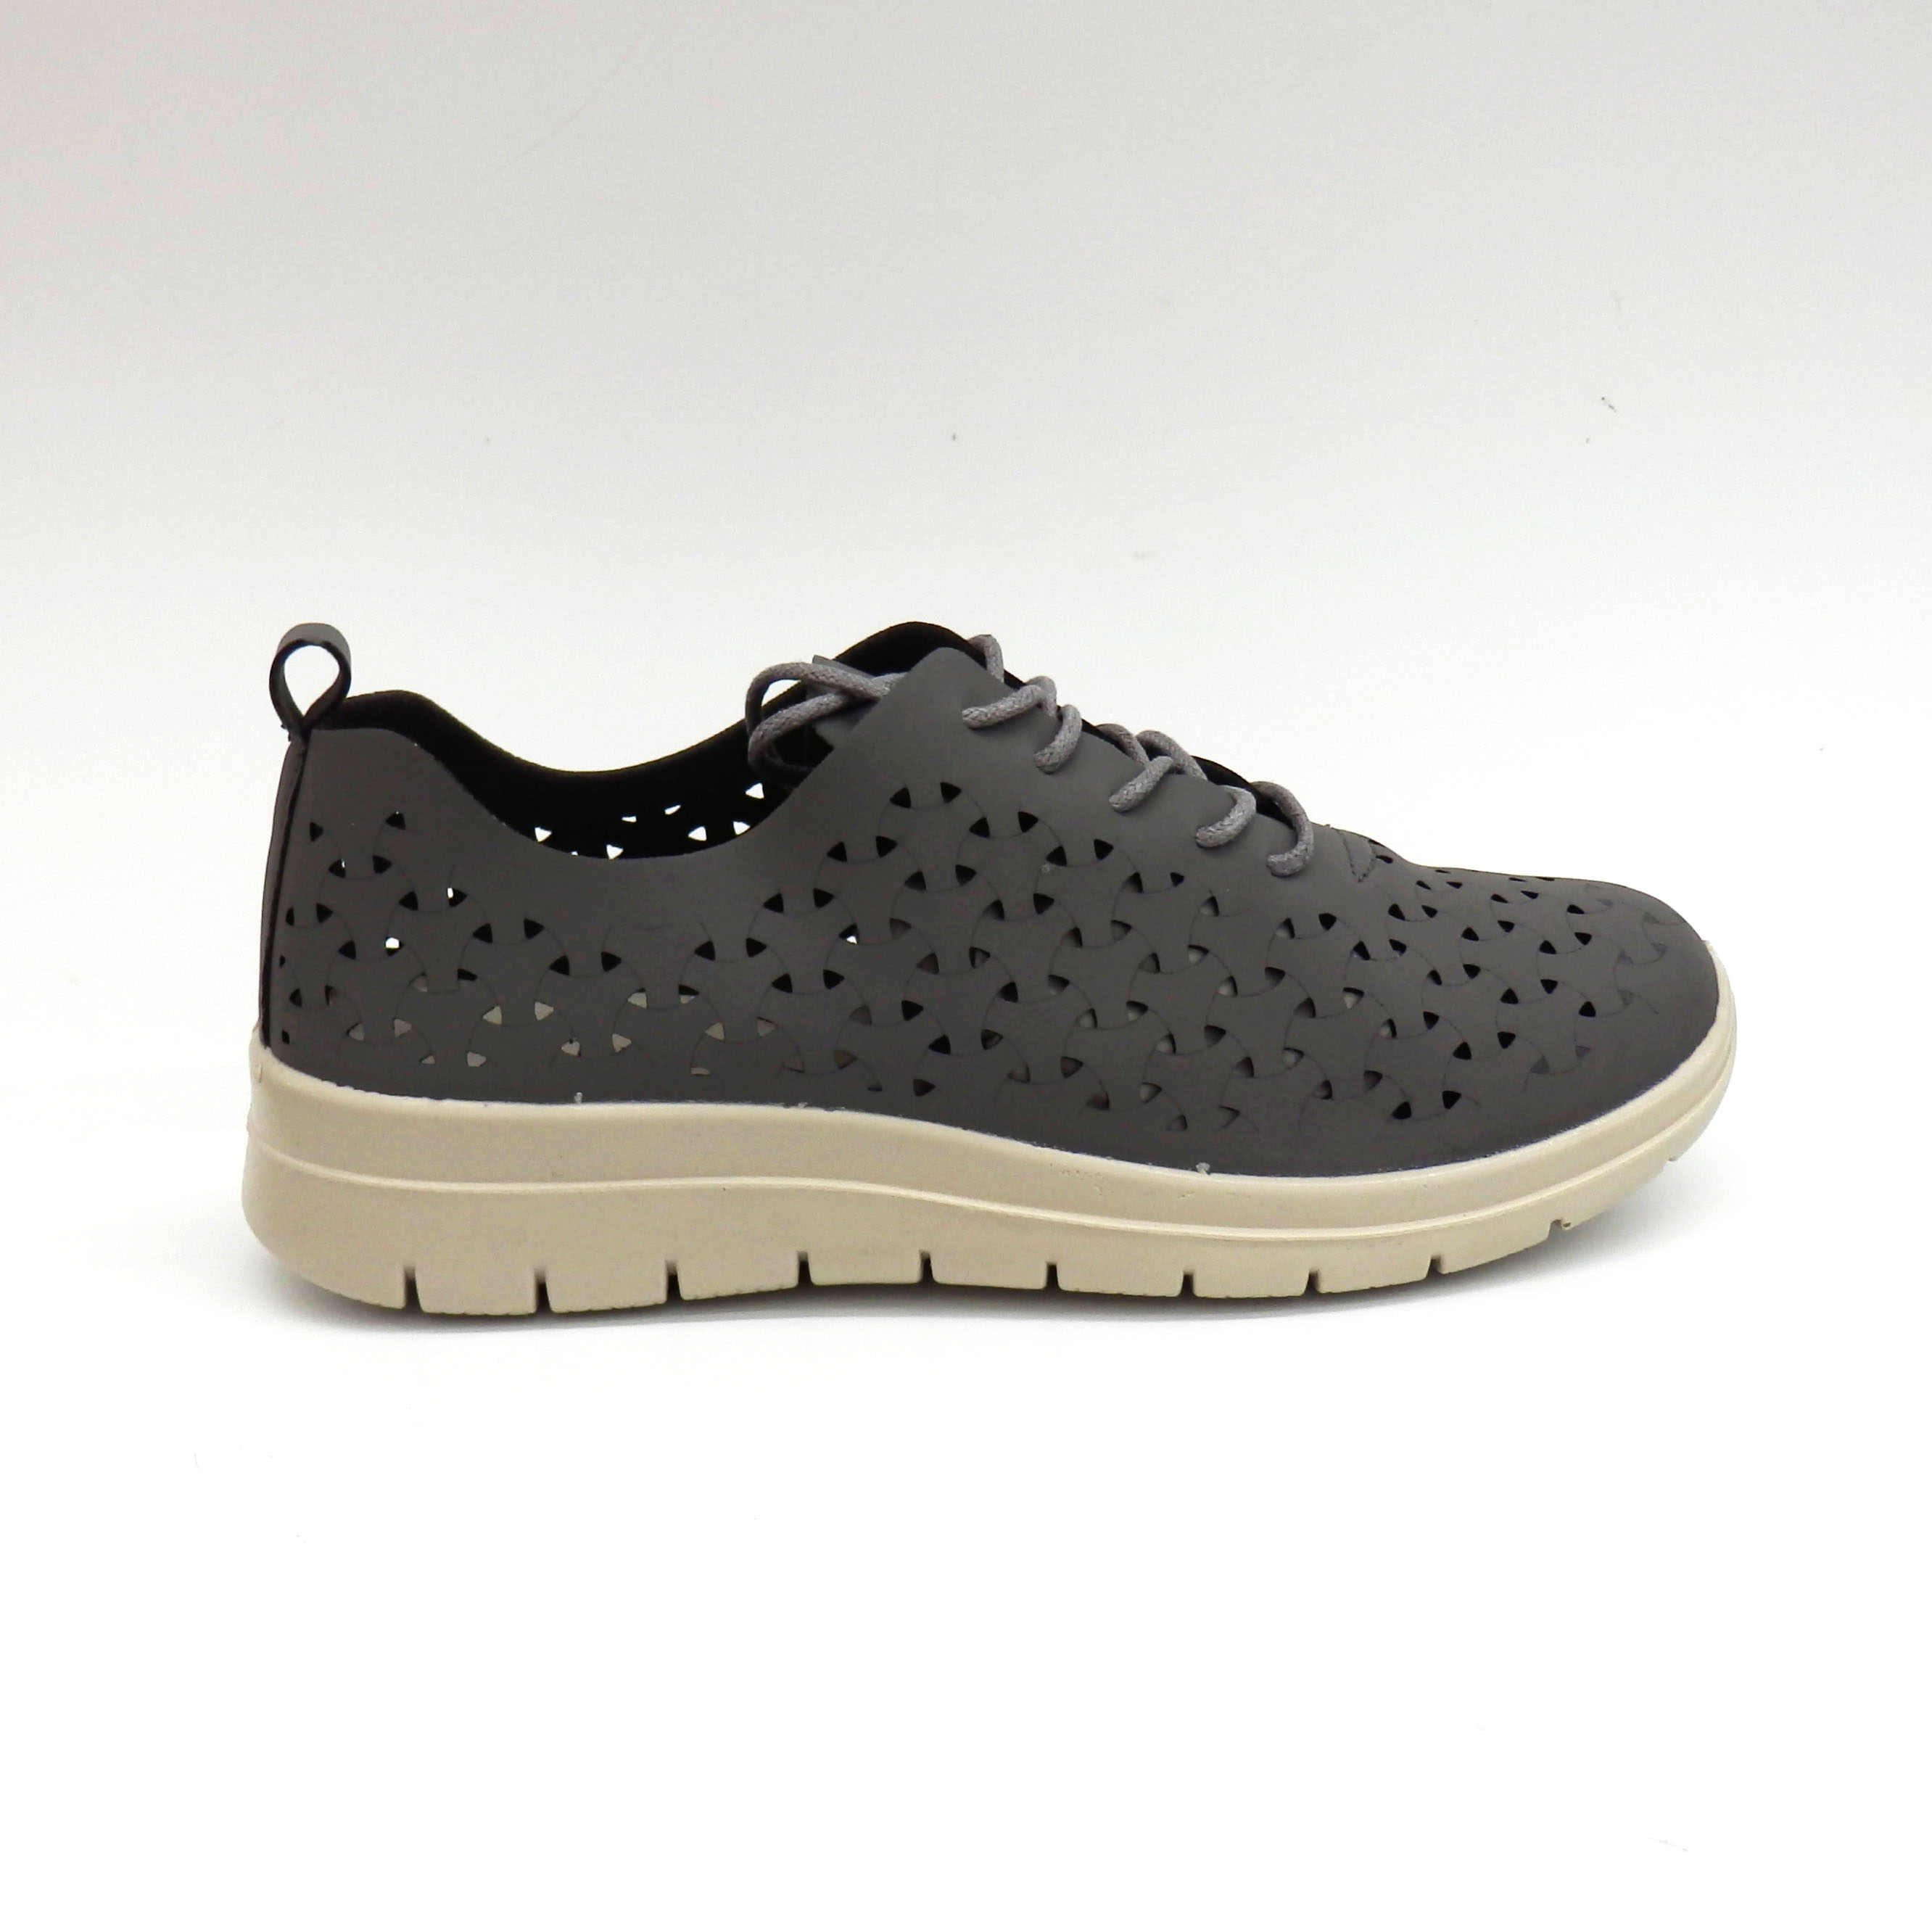 Tamicus Blucher Gris 218 Lcs Lcs Mujer Tamicus Blucher Gris 218  Lcs Lcs Mujer